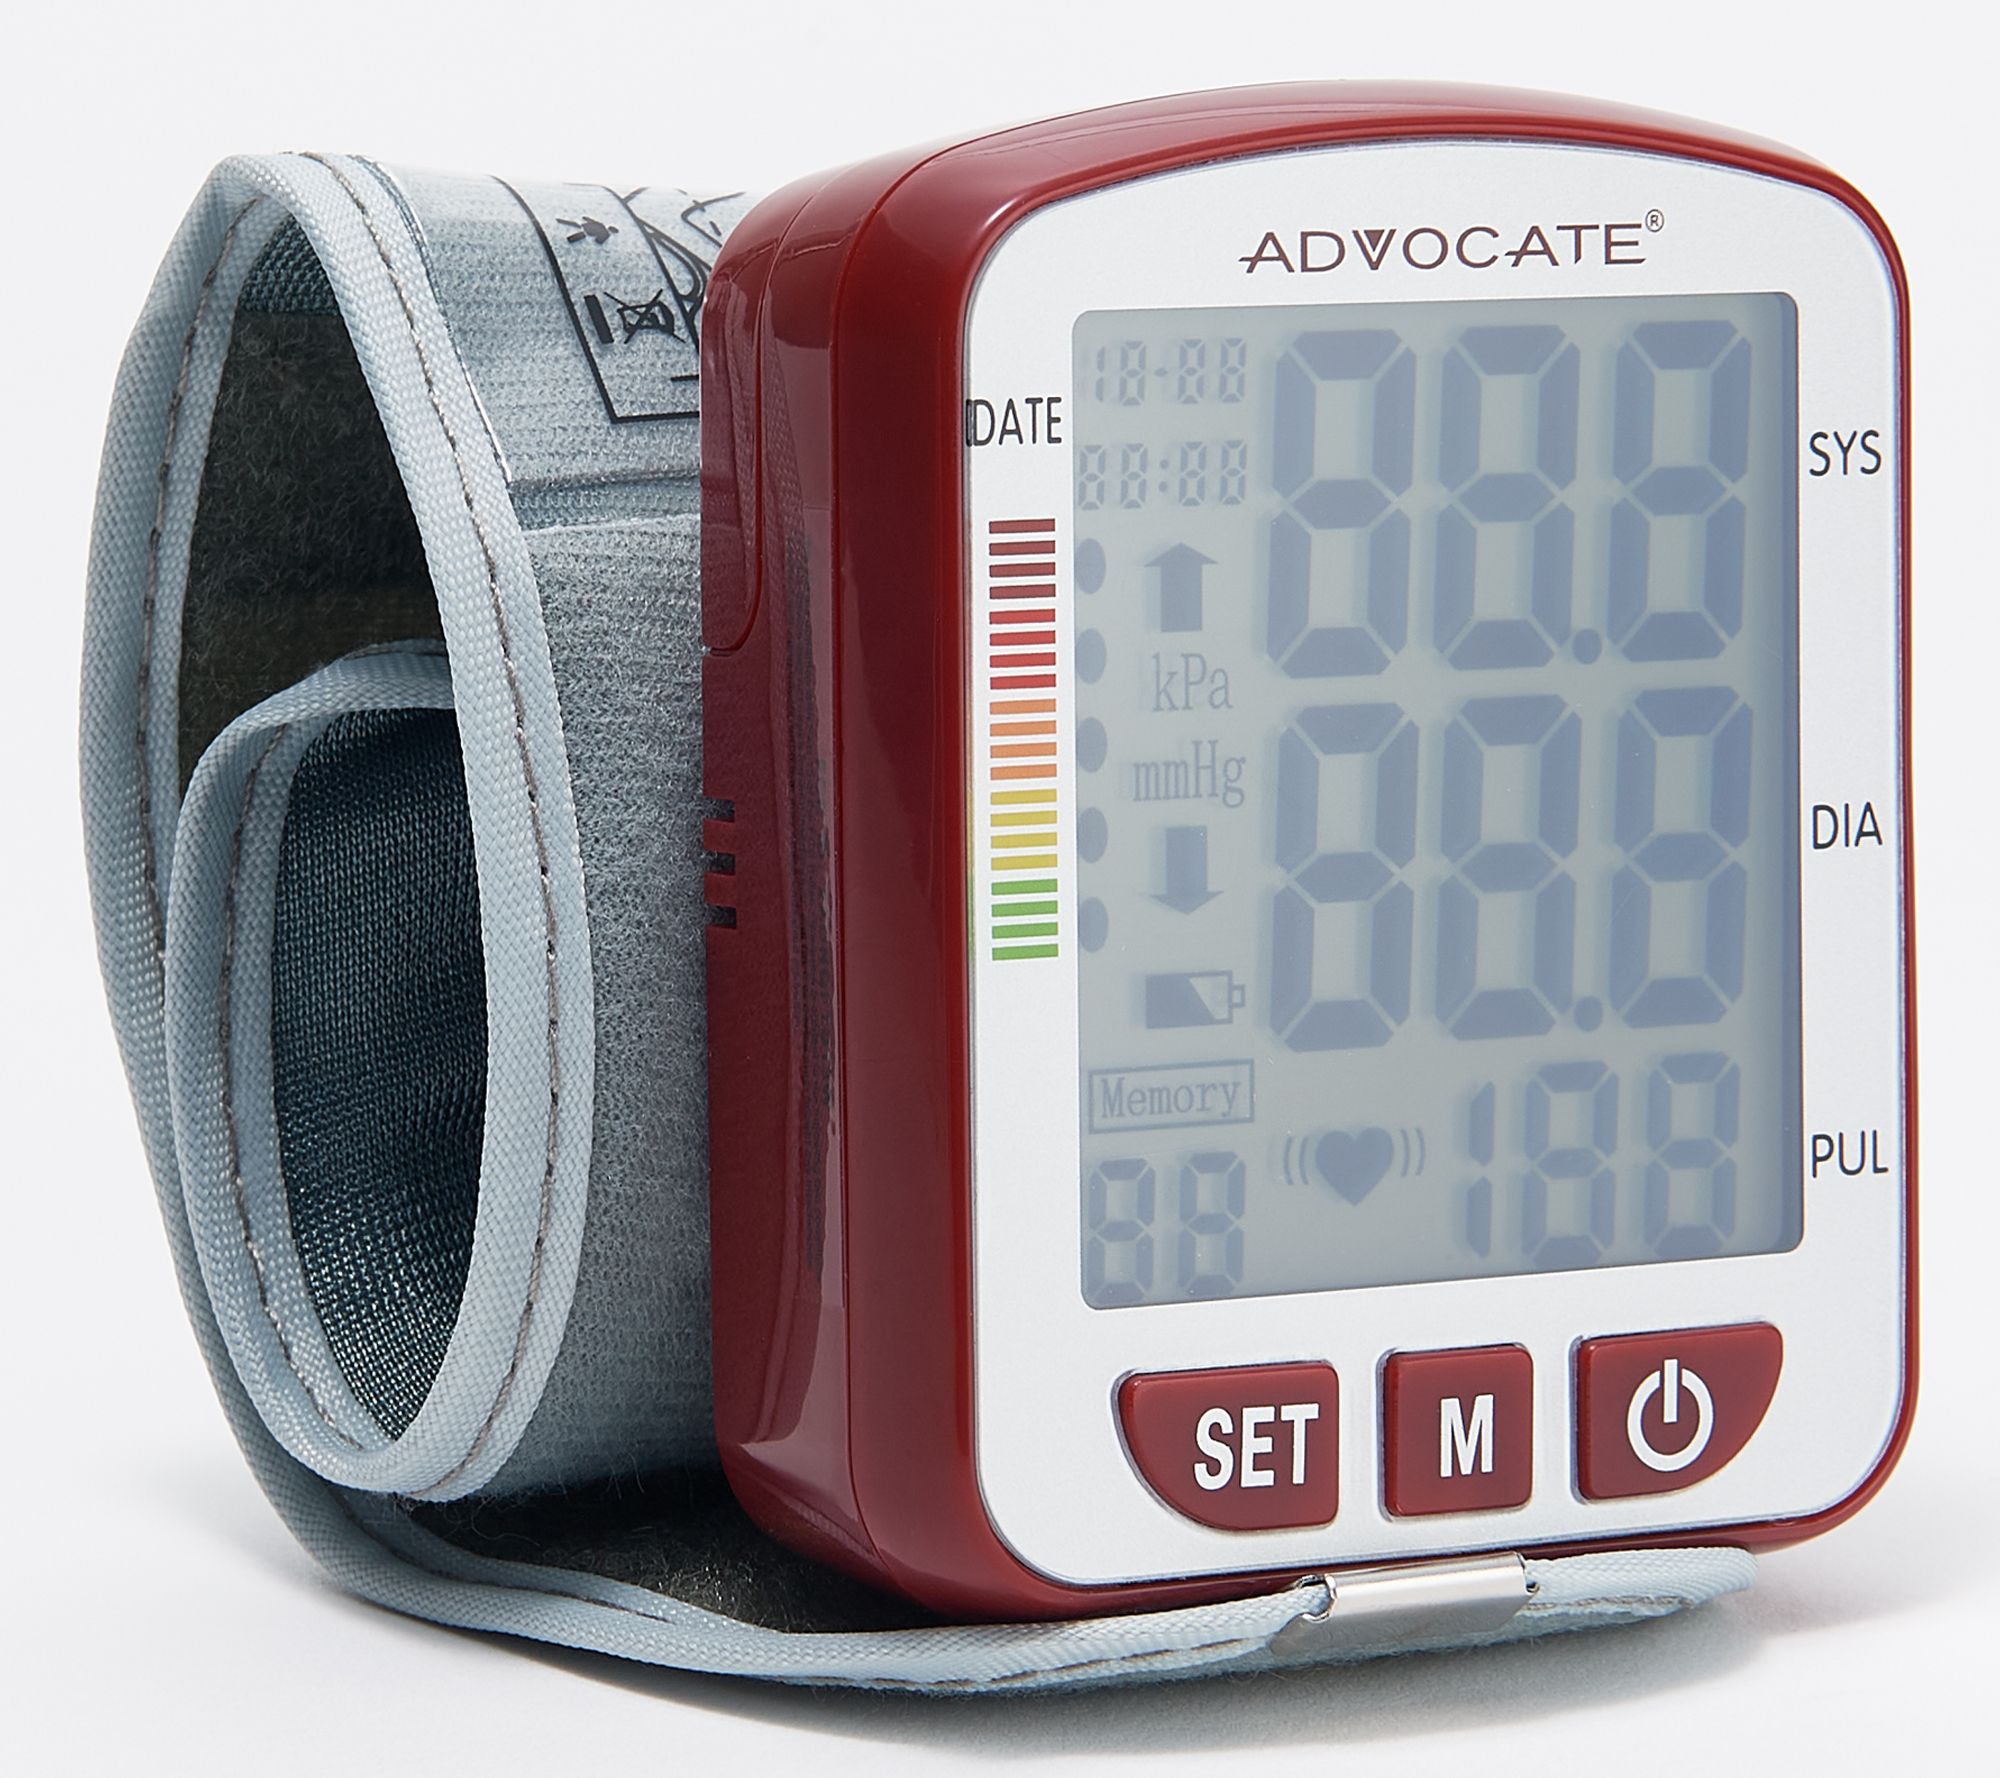 Best Blood Pressure Monitors For Home Use - Sports Illustrated